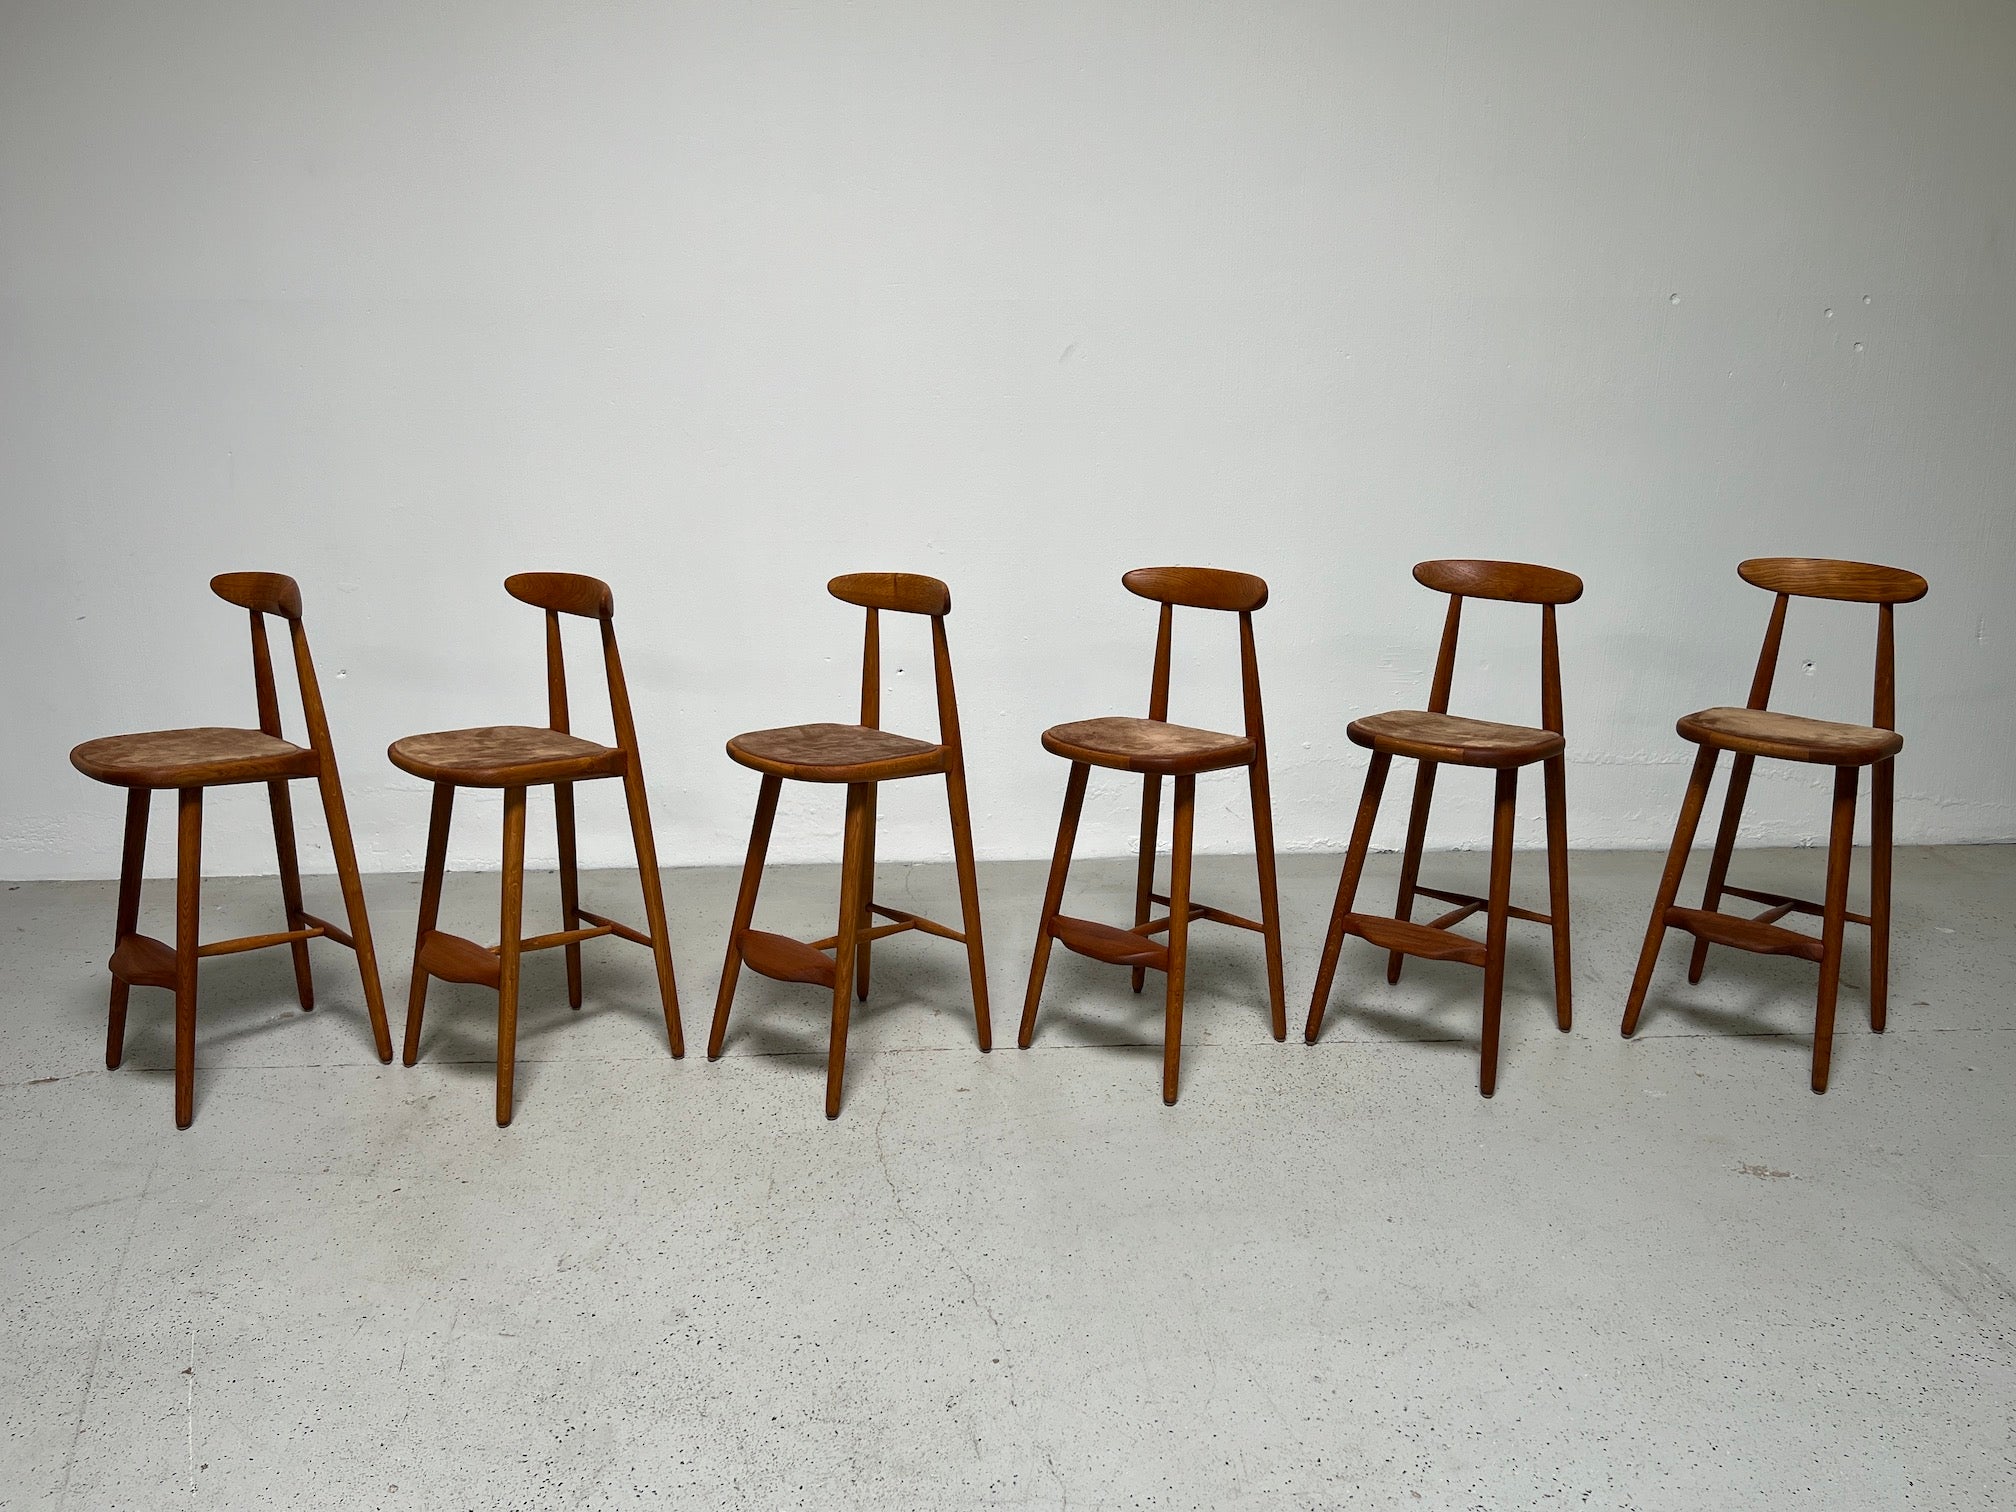 A rare set of six teak and oak barstools with suede seats. Designed by Vilhelm Wohlert for Stolefabriken Odense Denmark.